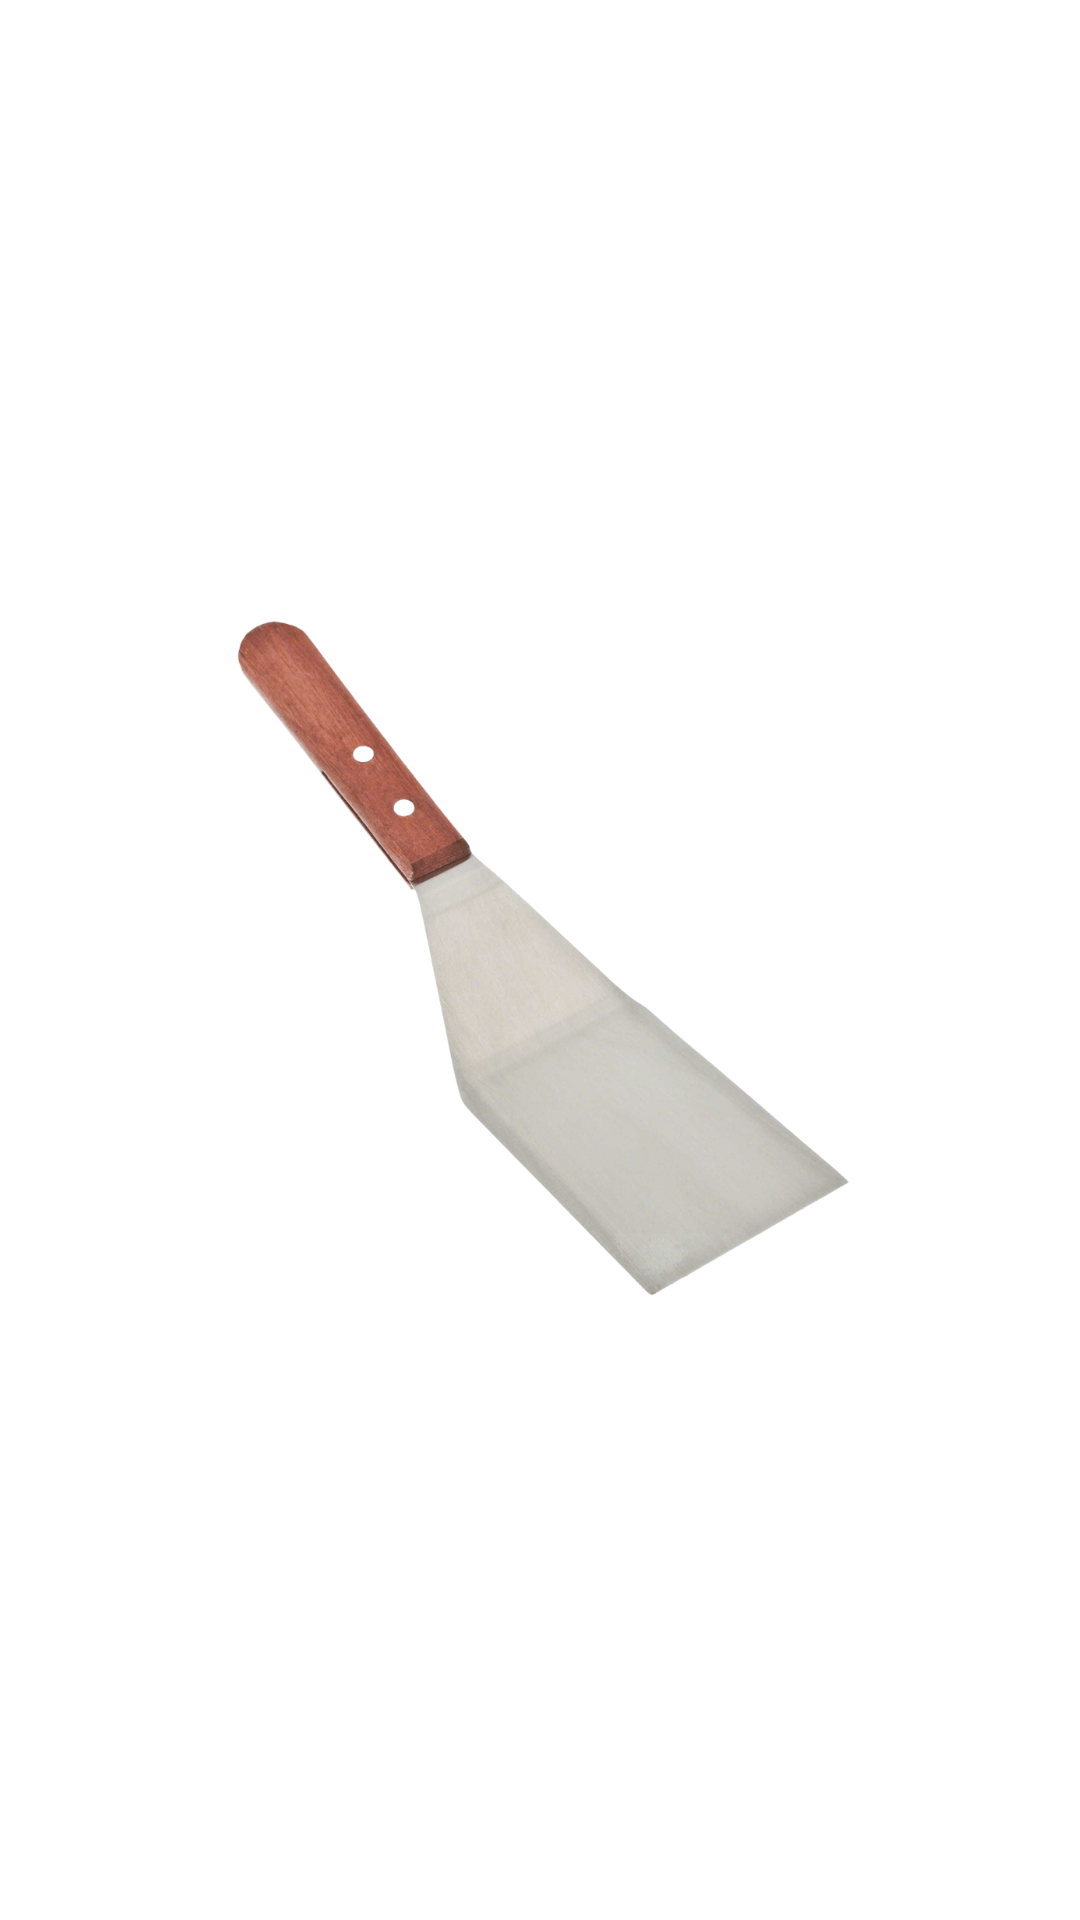 Royal Industries 11-inch Grill Spatula with Beveled Edge Steel Blade and Wooden Handle  Quickly and easily flip meats and burgers on your flat top griddle with this 11 inch  beveled edge stainless steel hamburger turner with wooden handle-ROY TH 11